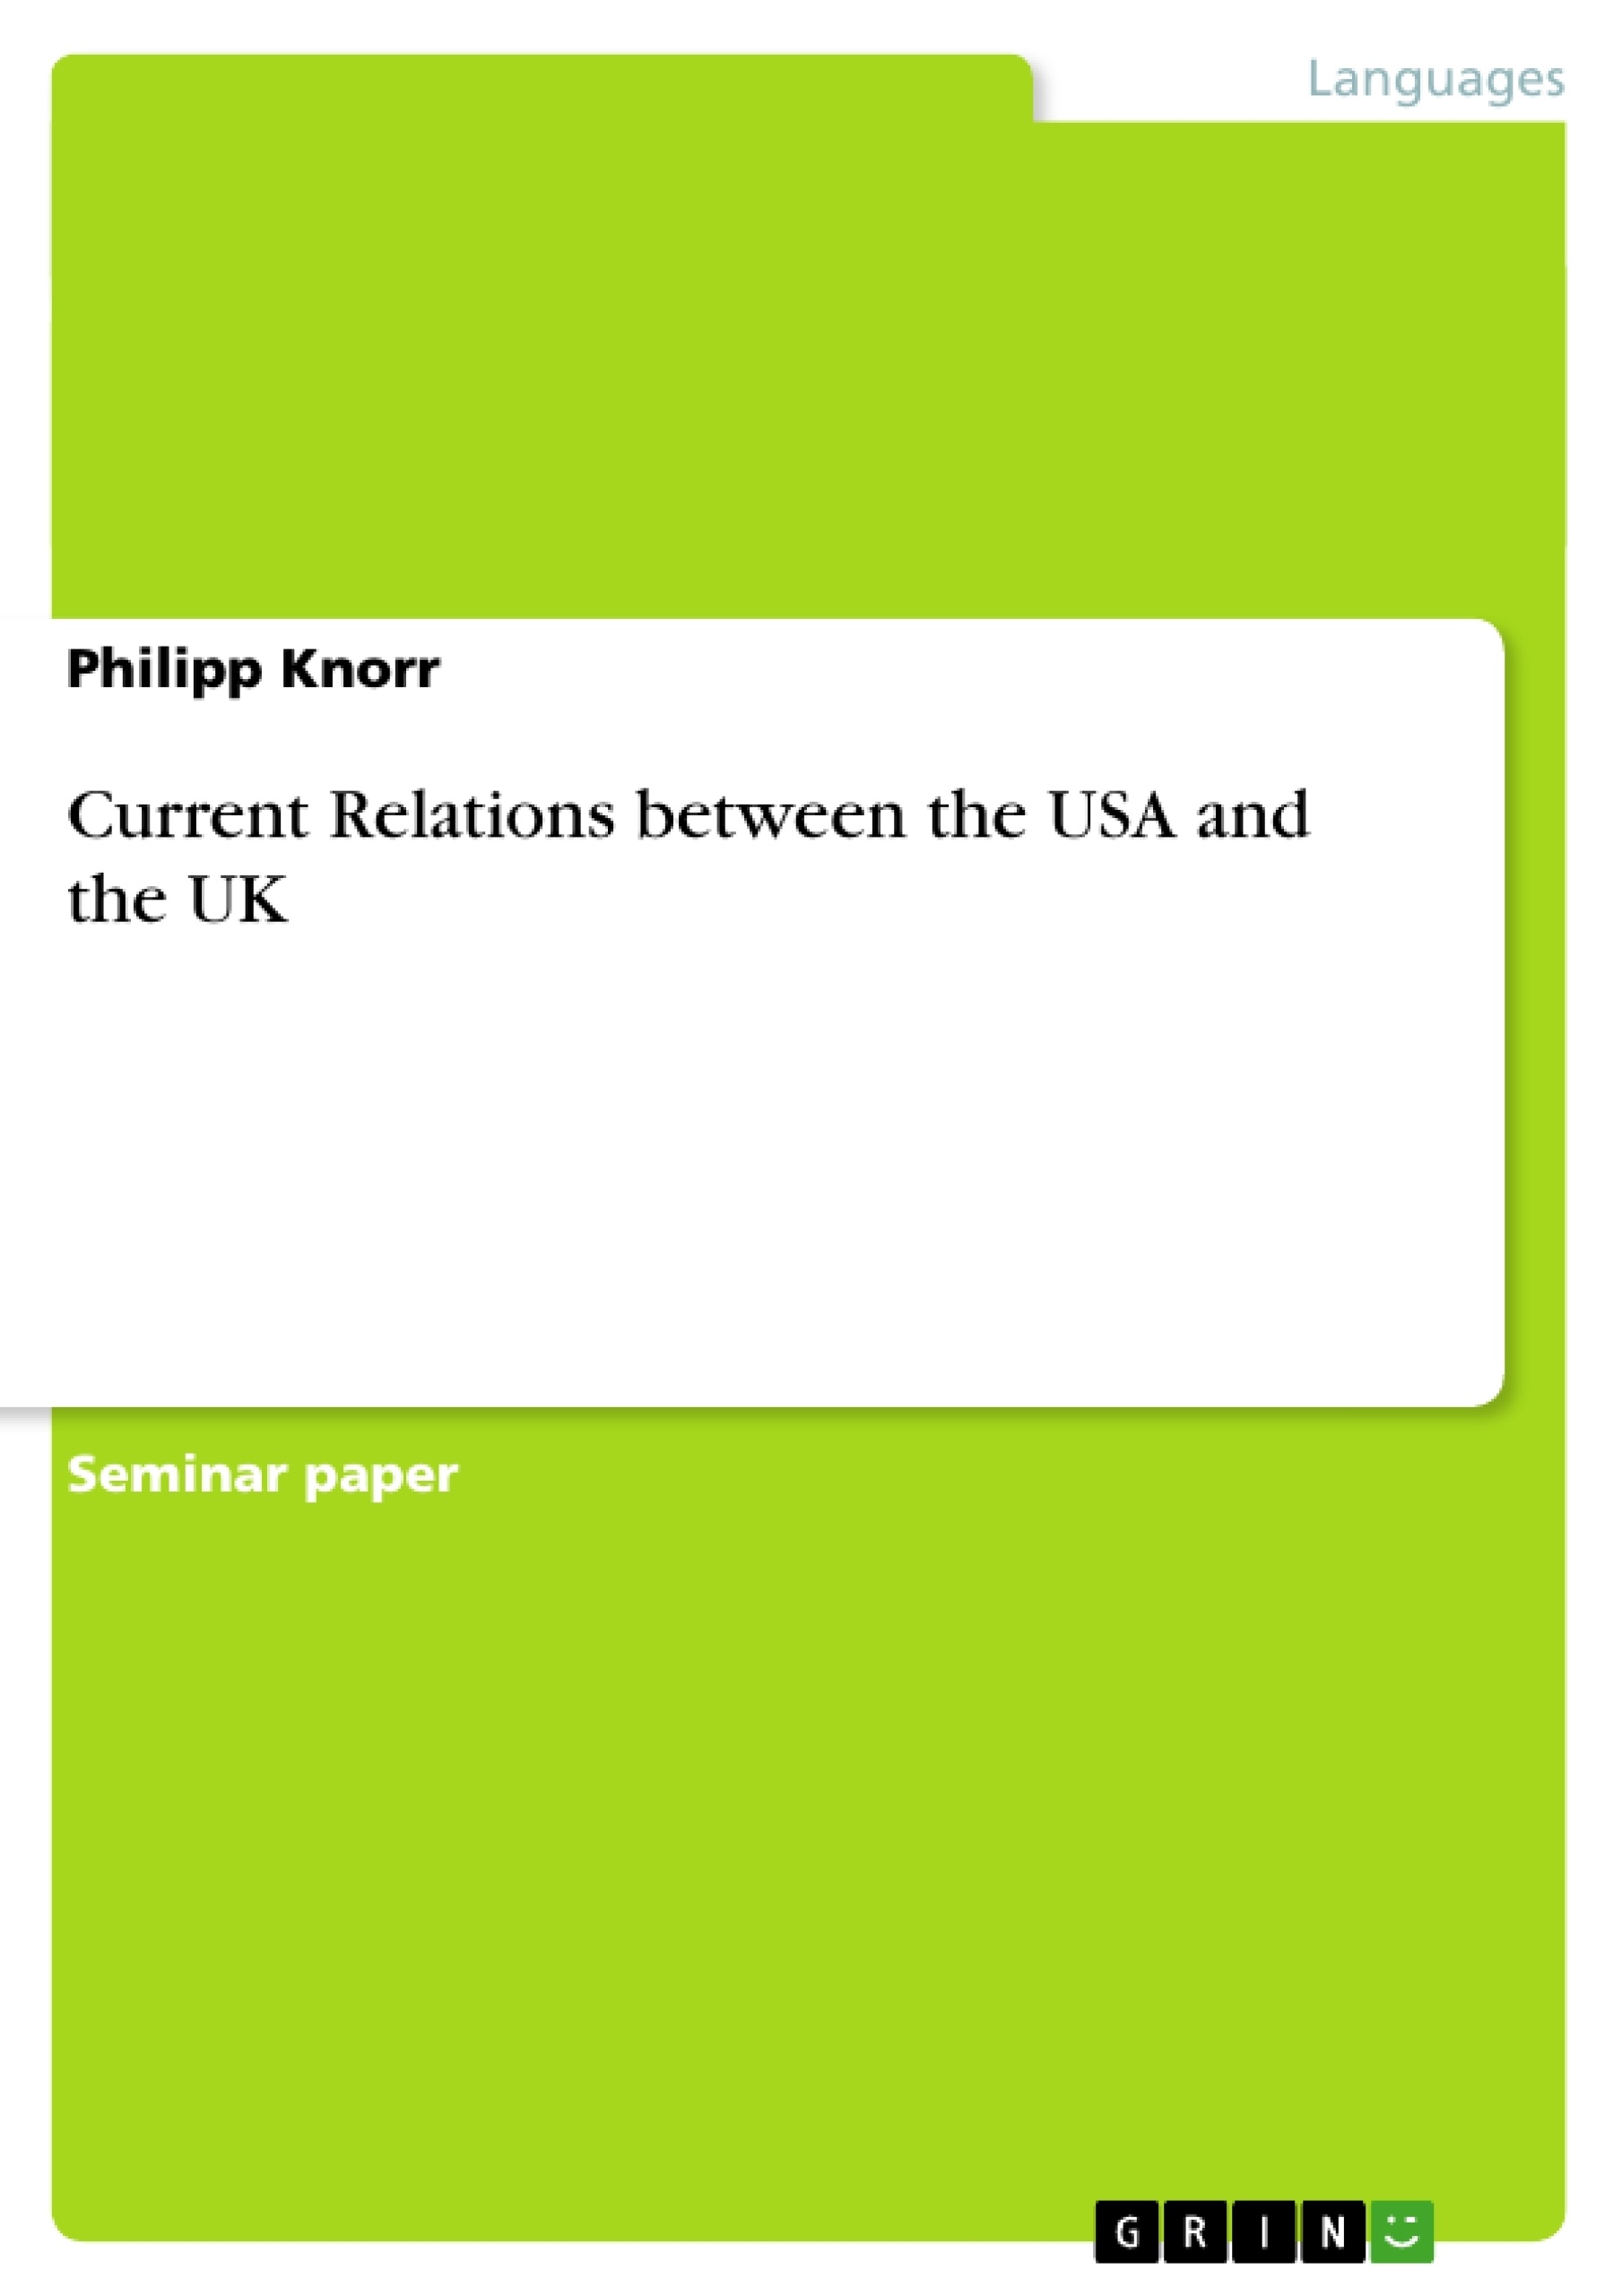 Title: Current Relations between the USA and the UK